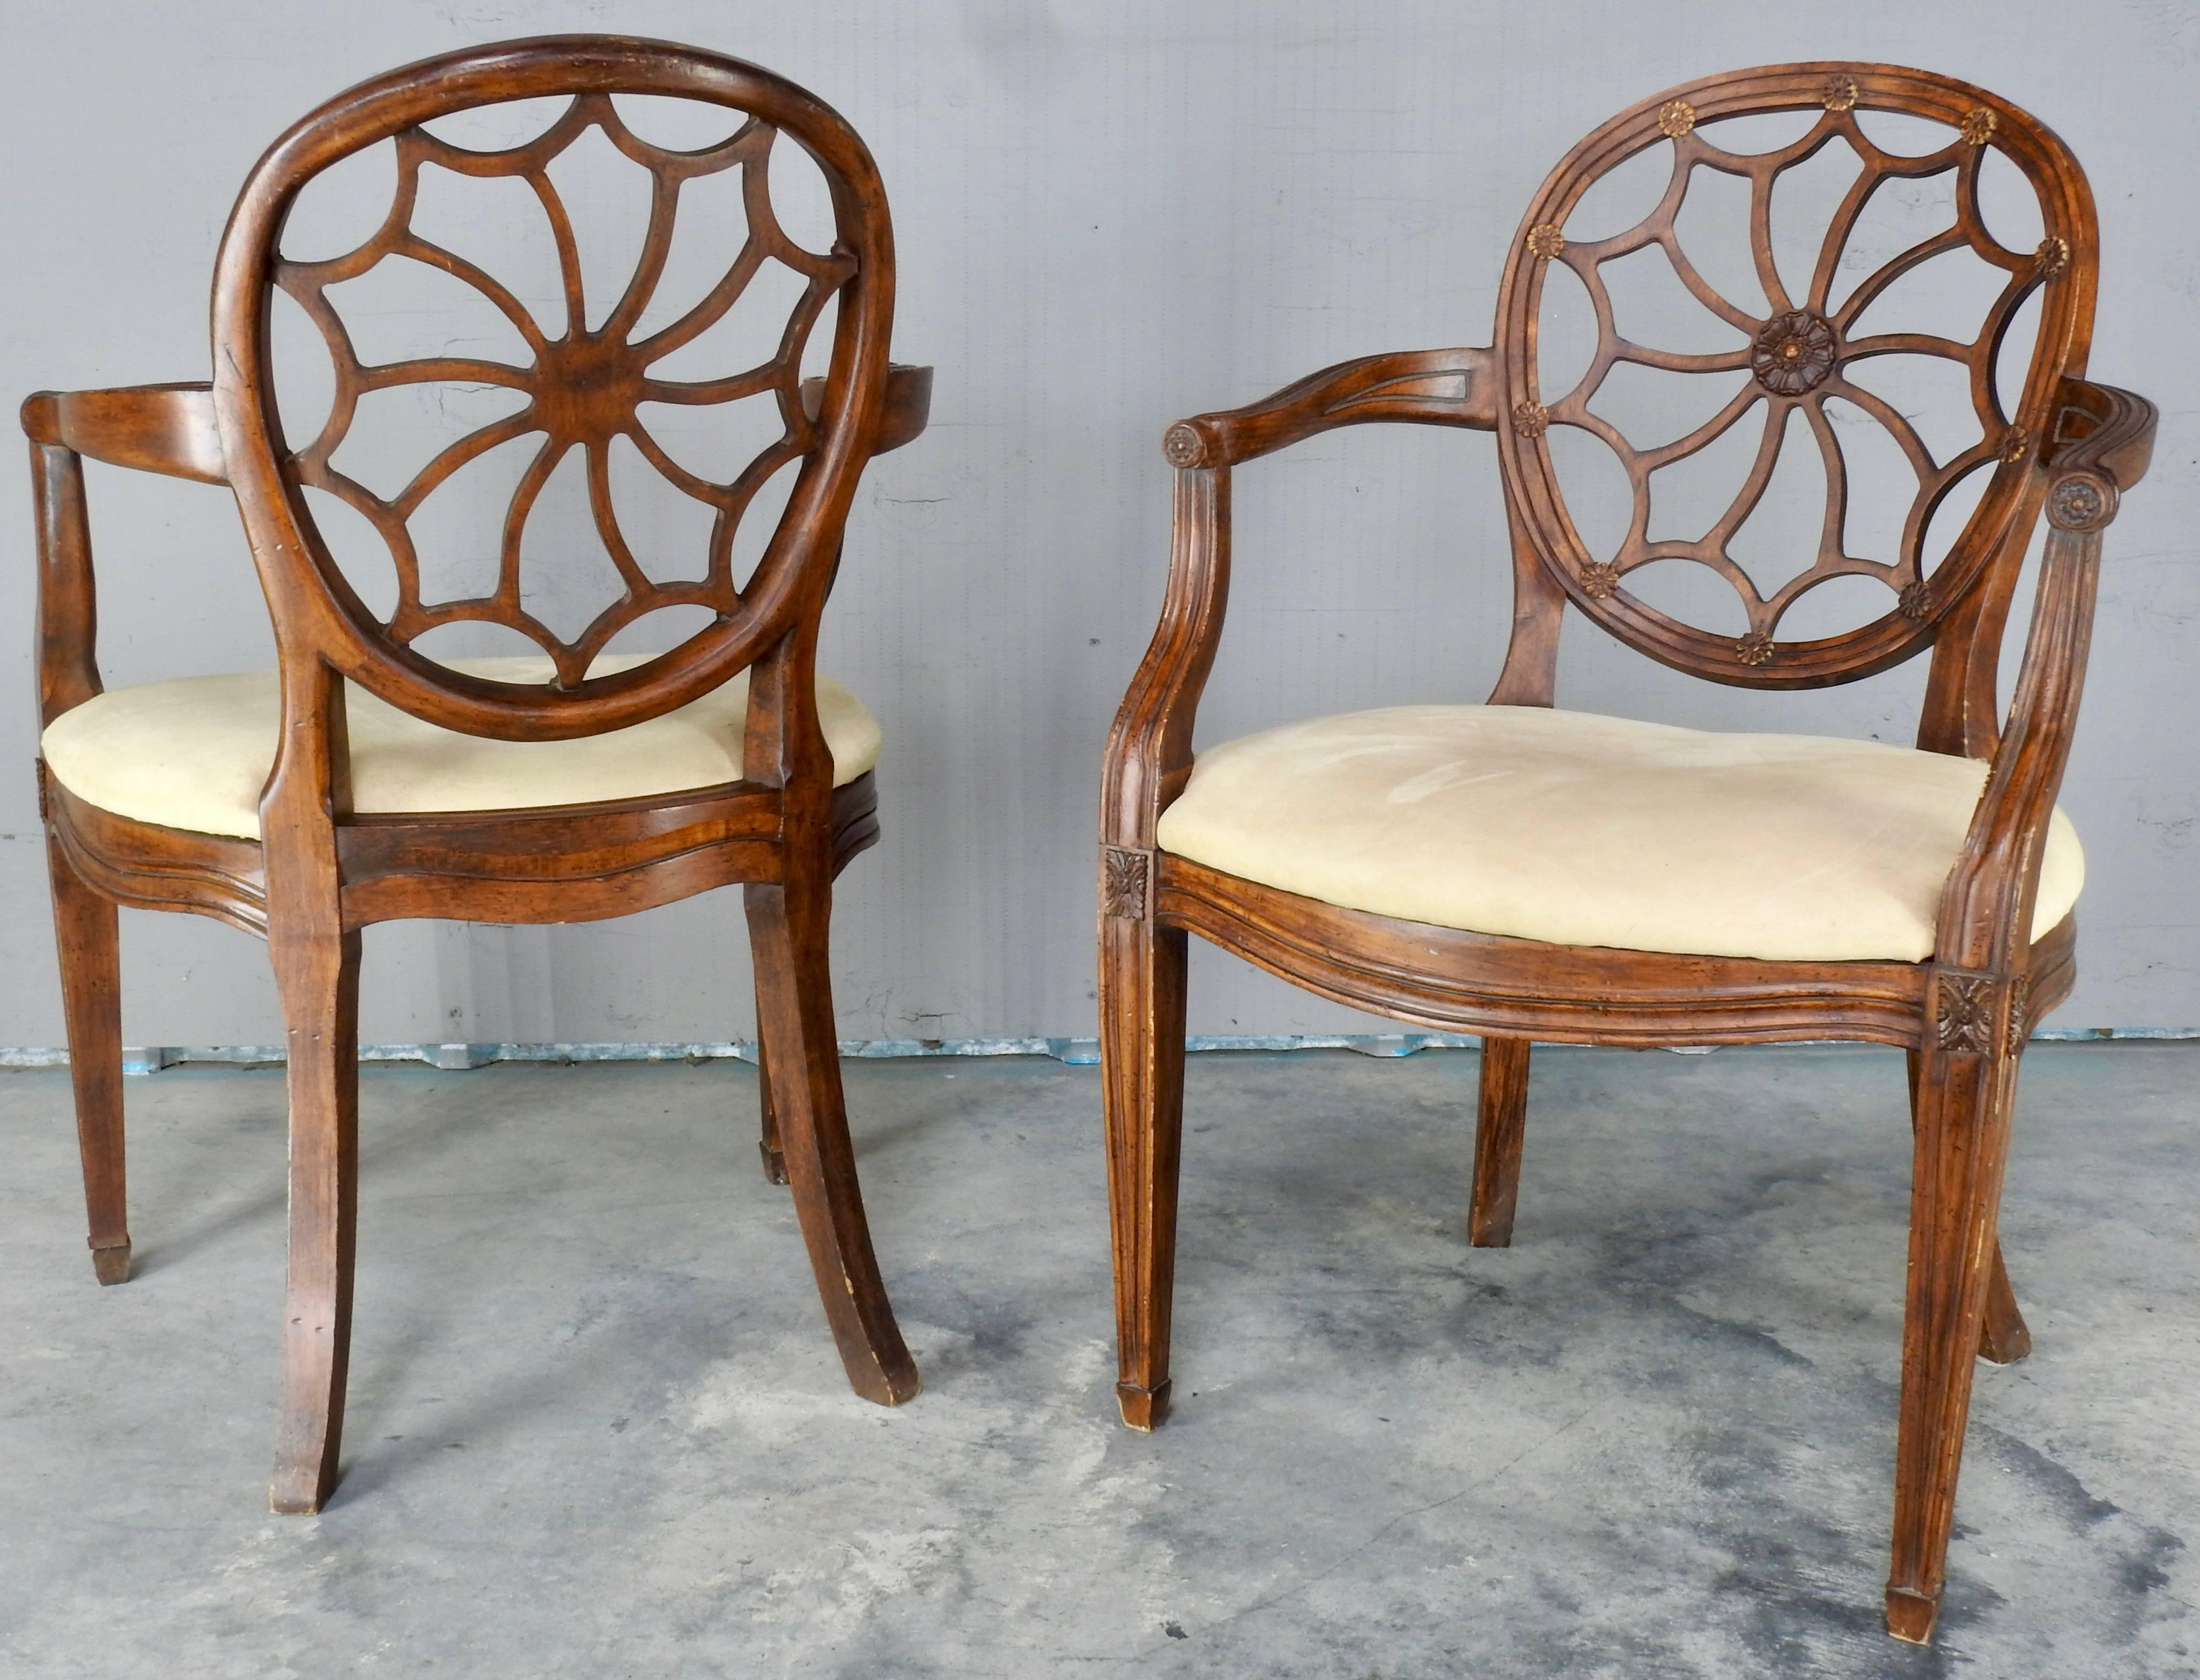 We are offering a pair of elegant spider back Hepplewhite style chairs from the early 20th century. The centre of the web has nicely carved details in a floral pattern and that floral pattern is repeated at the end of each curve where the back meets